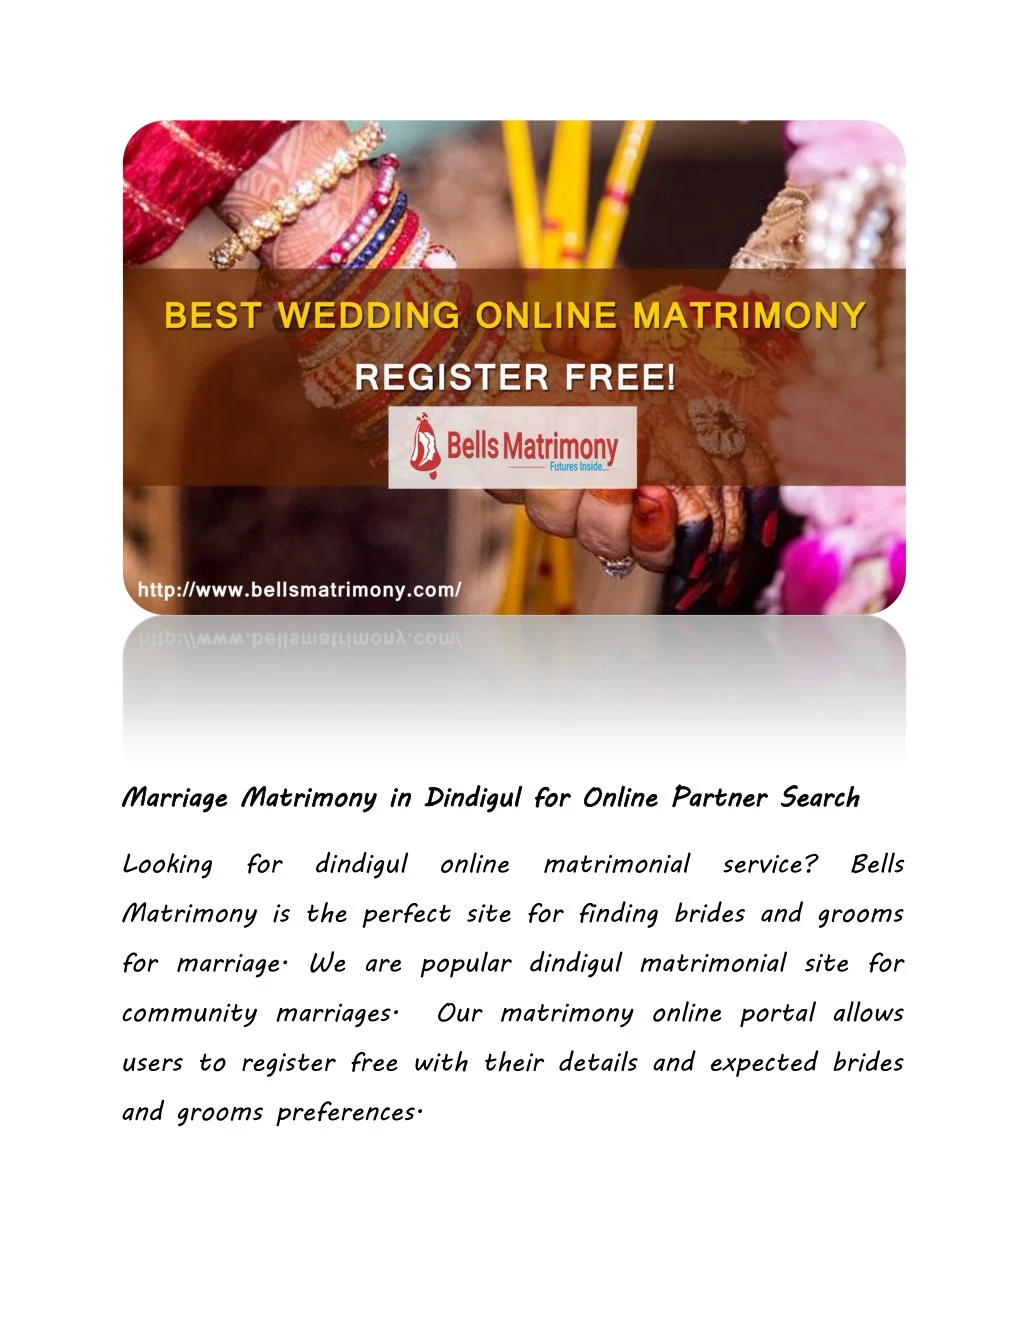 marriage matrimony in dindigul for online partner